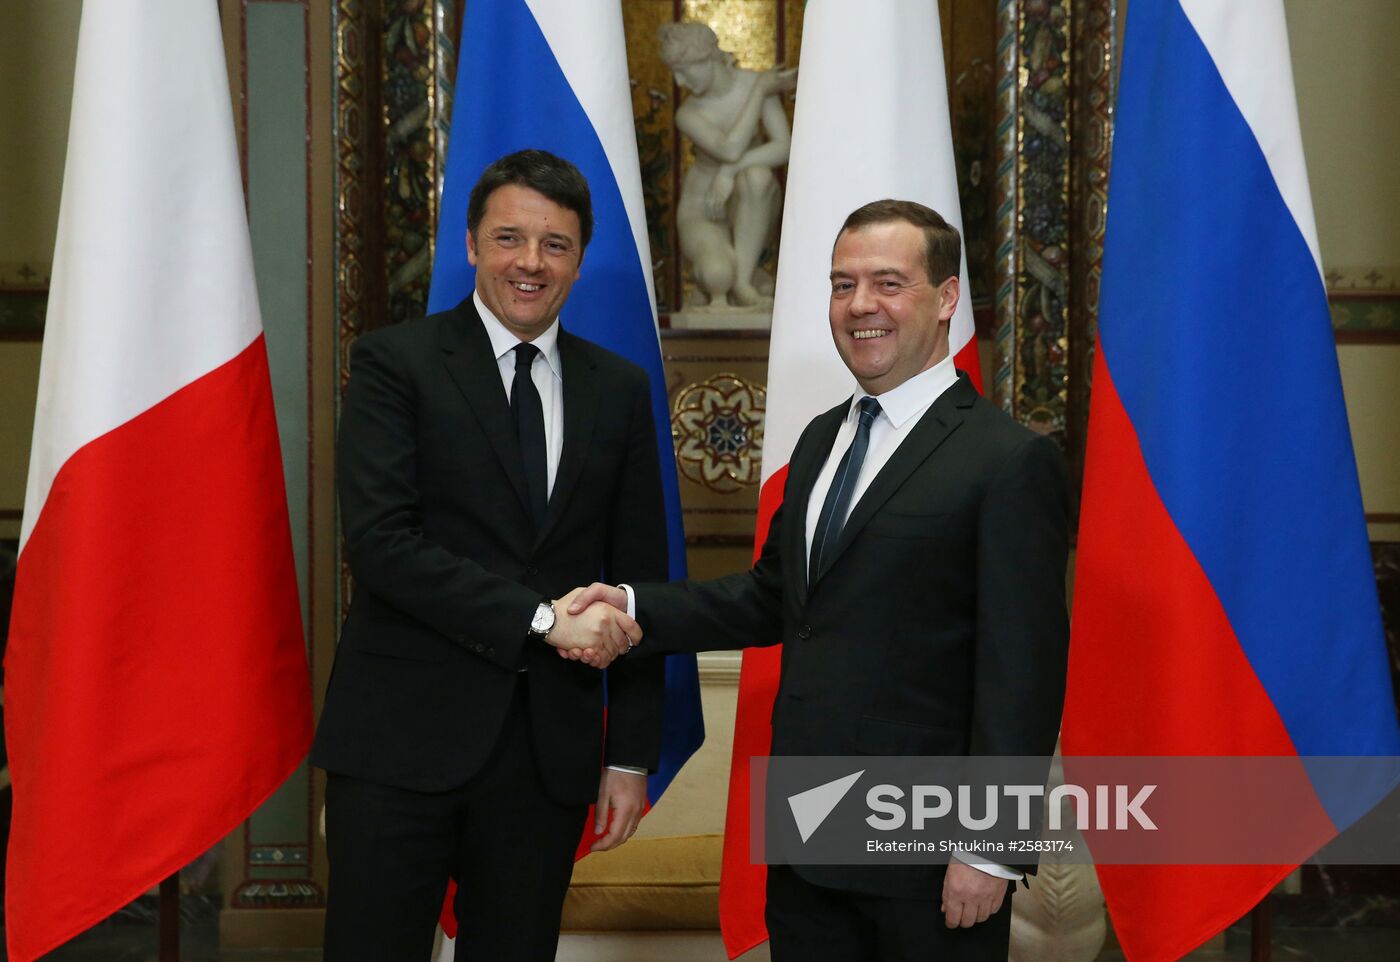 Russian Prime Minister Dmitry Medvedev meets with his Italian counterpart Matteo Renzi